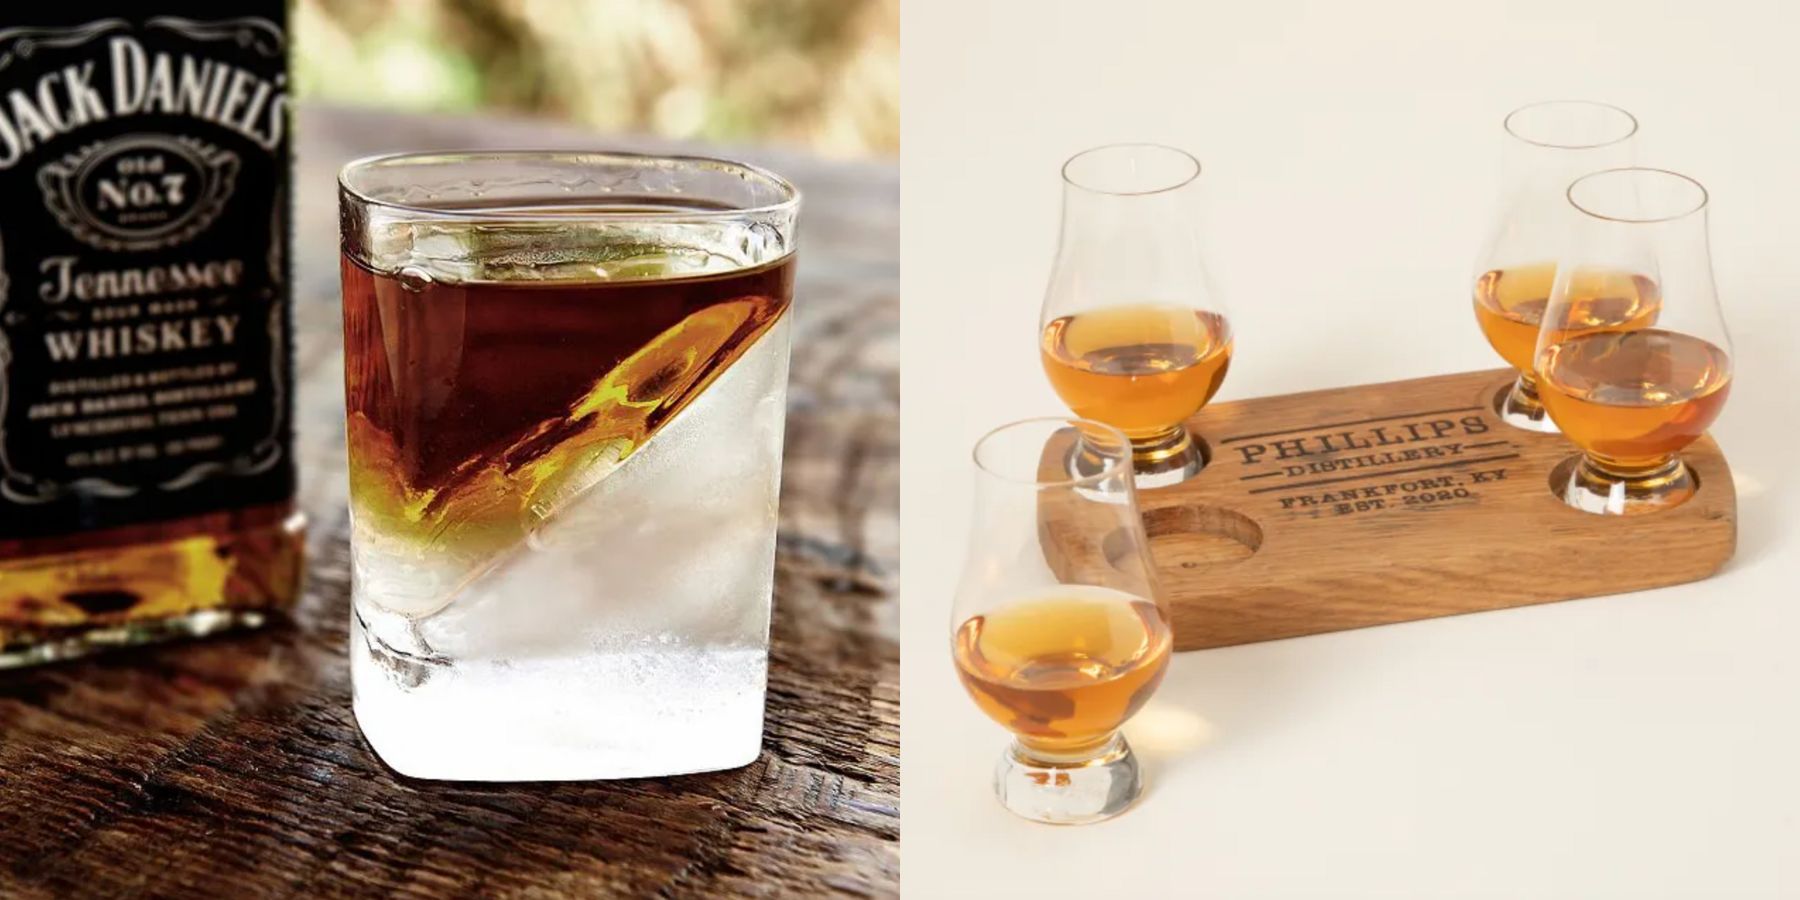 29 Incredible Gifts for Bourbon Lovers - Expert Picked